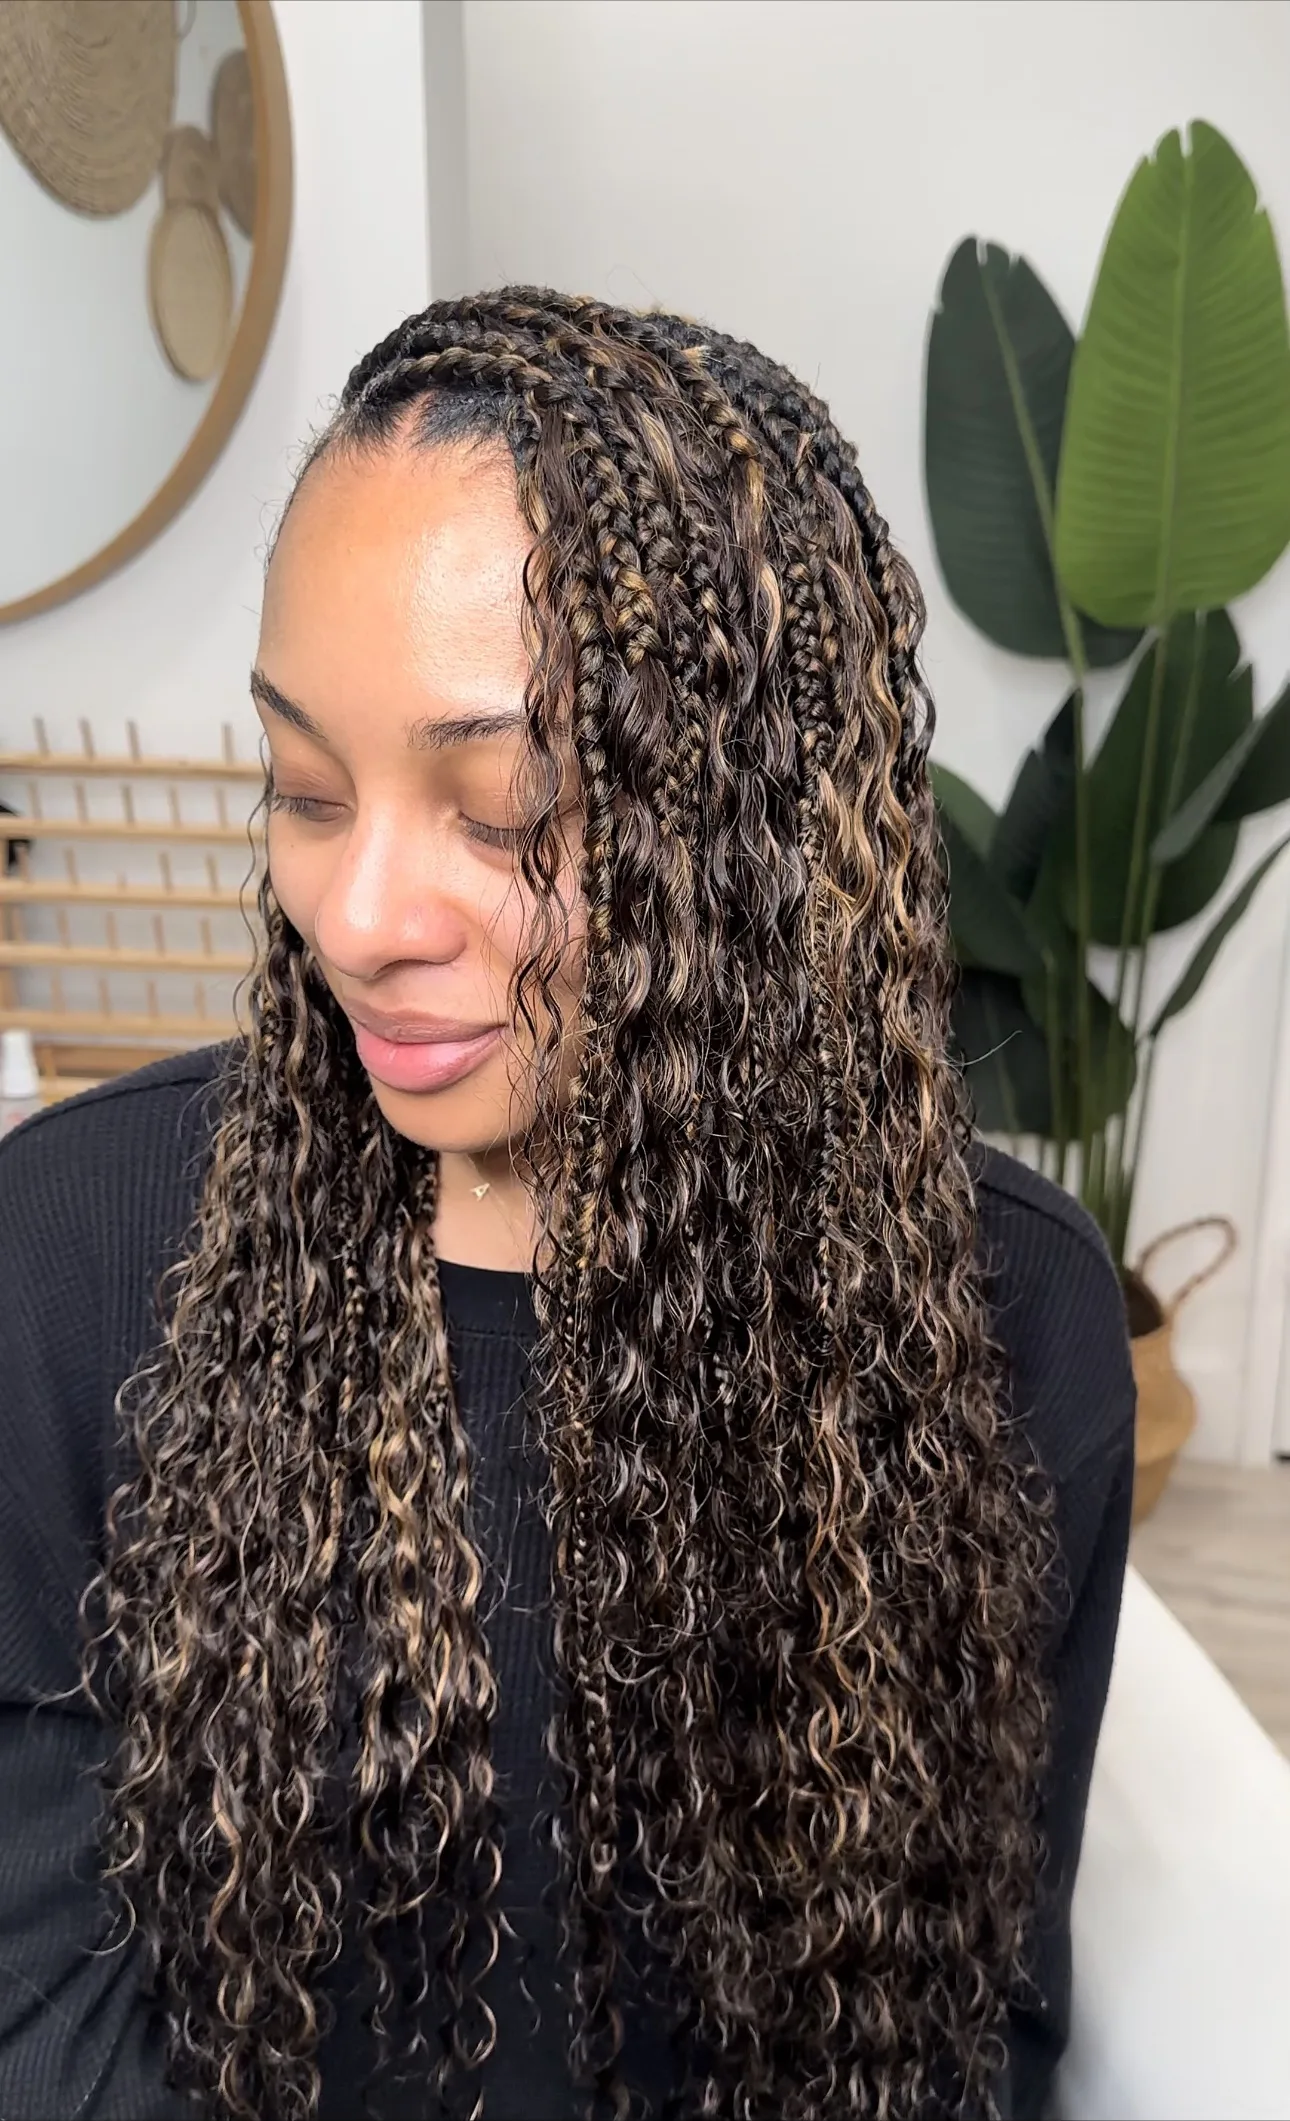 How to curlt ehe ends of your braids and curly bits for goddess braids, fulani braids